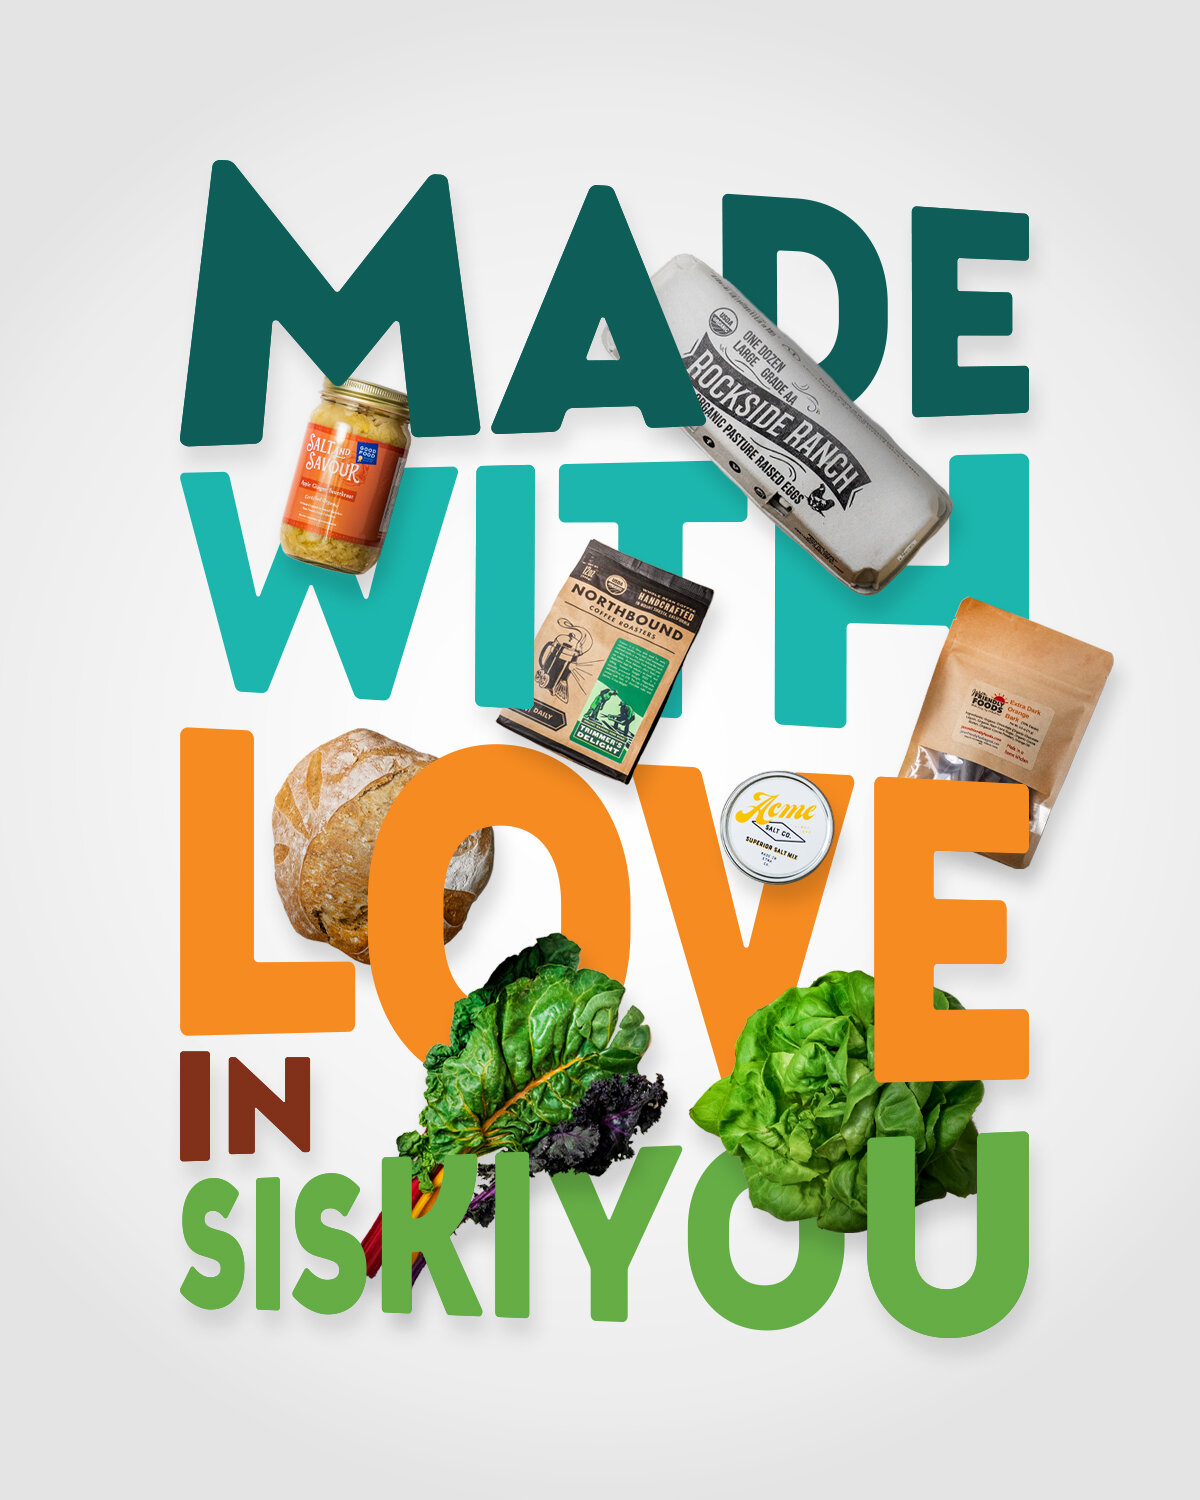 Siskiyou is the home for so many amazing food producers who pour their love into the product they create. 👨&zwj;🌾🧑&zwj;🍳 
Shop for the best local foods at Siskiyou Farm Co. today! 
🚨 Remember to get your order in by tonight for Wednesday pickup!